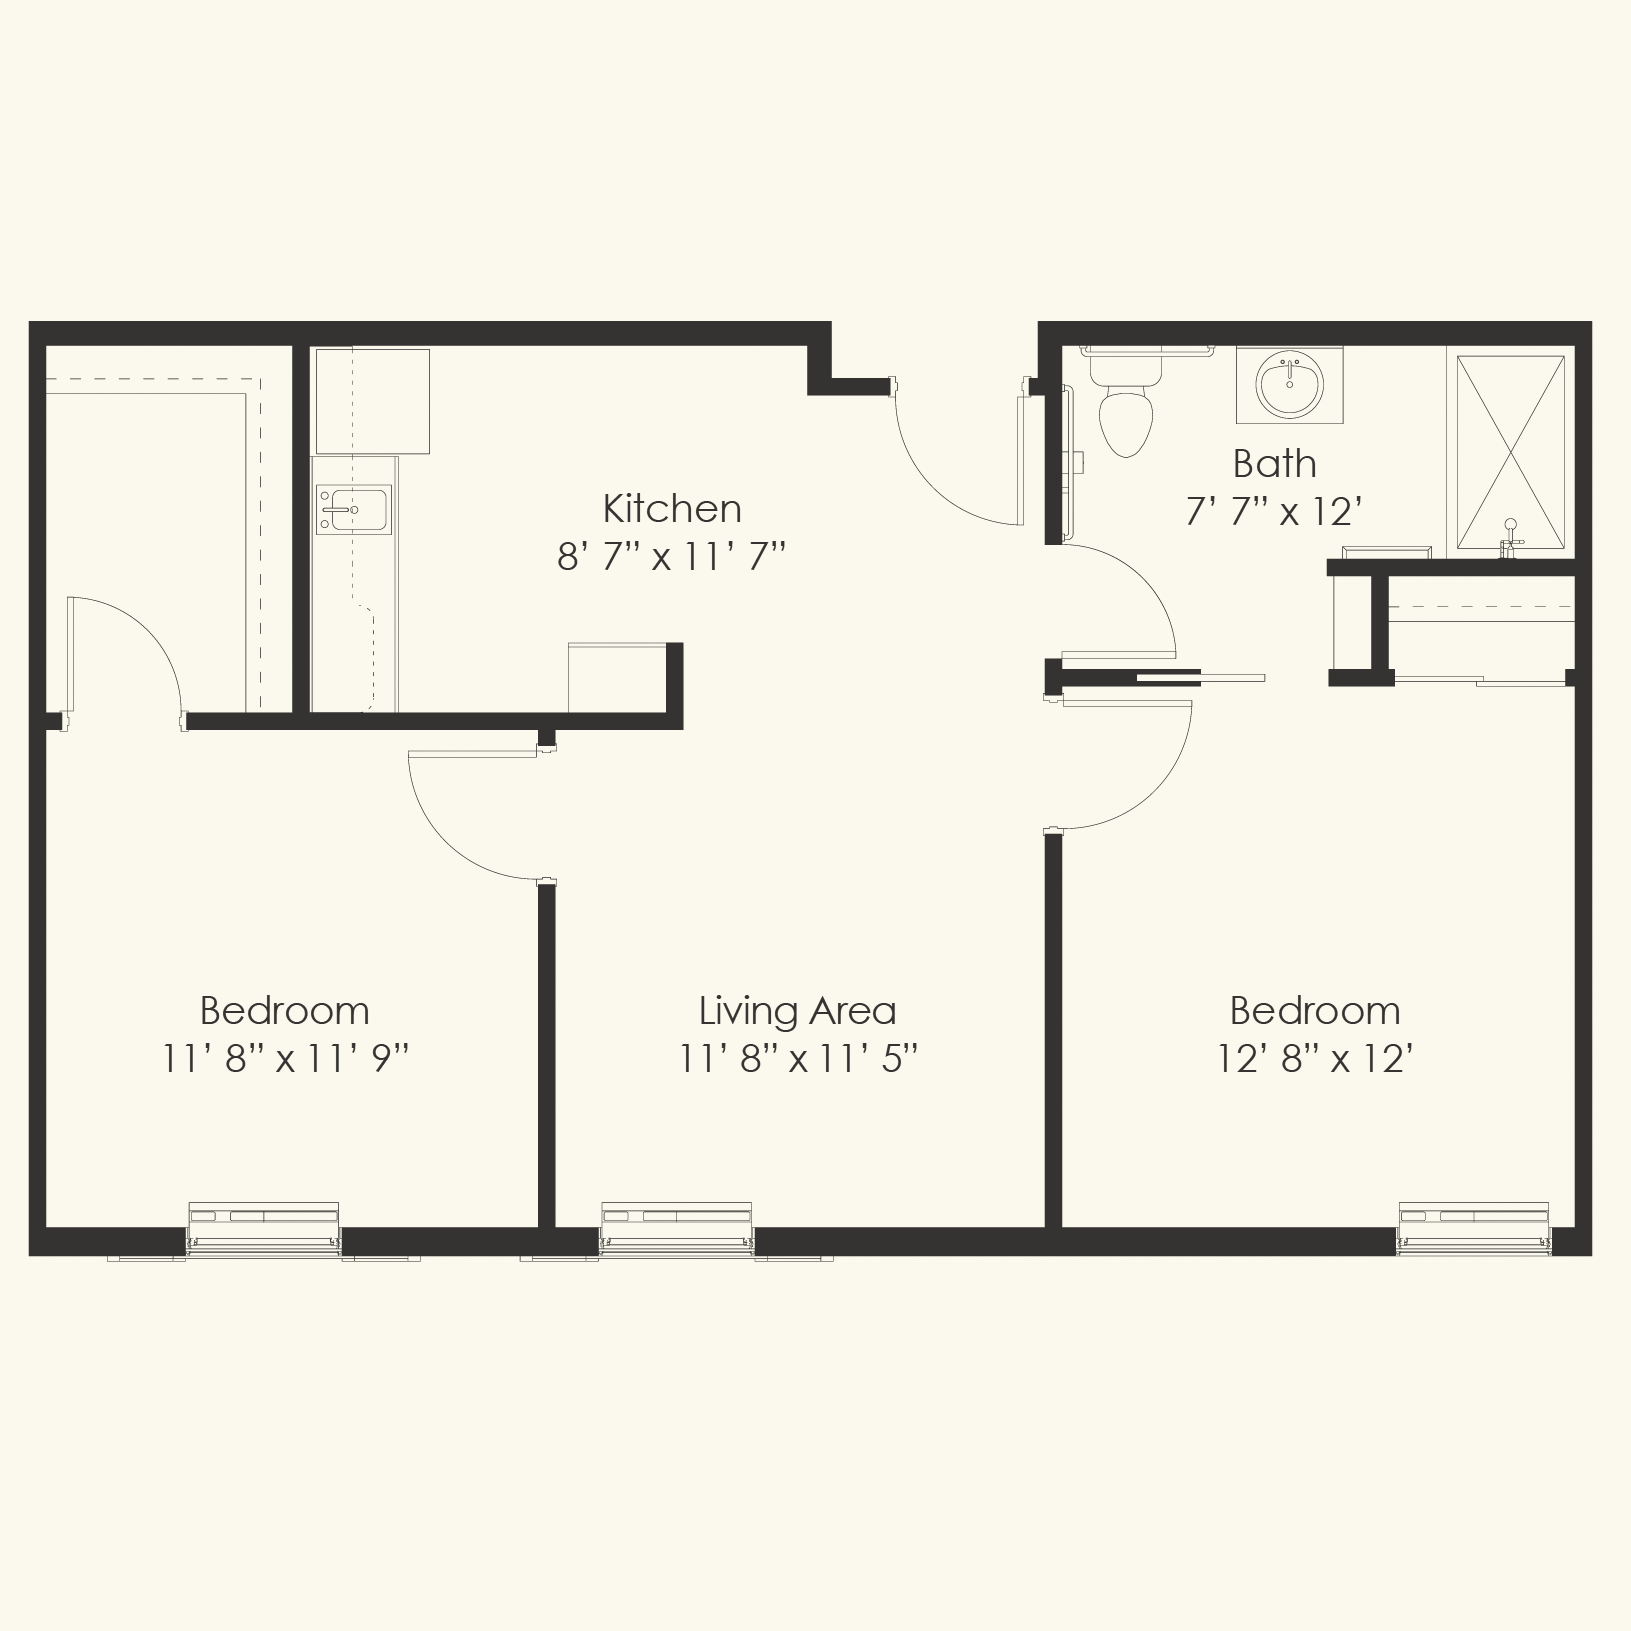 2 bed layout